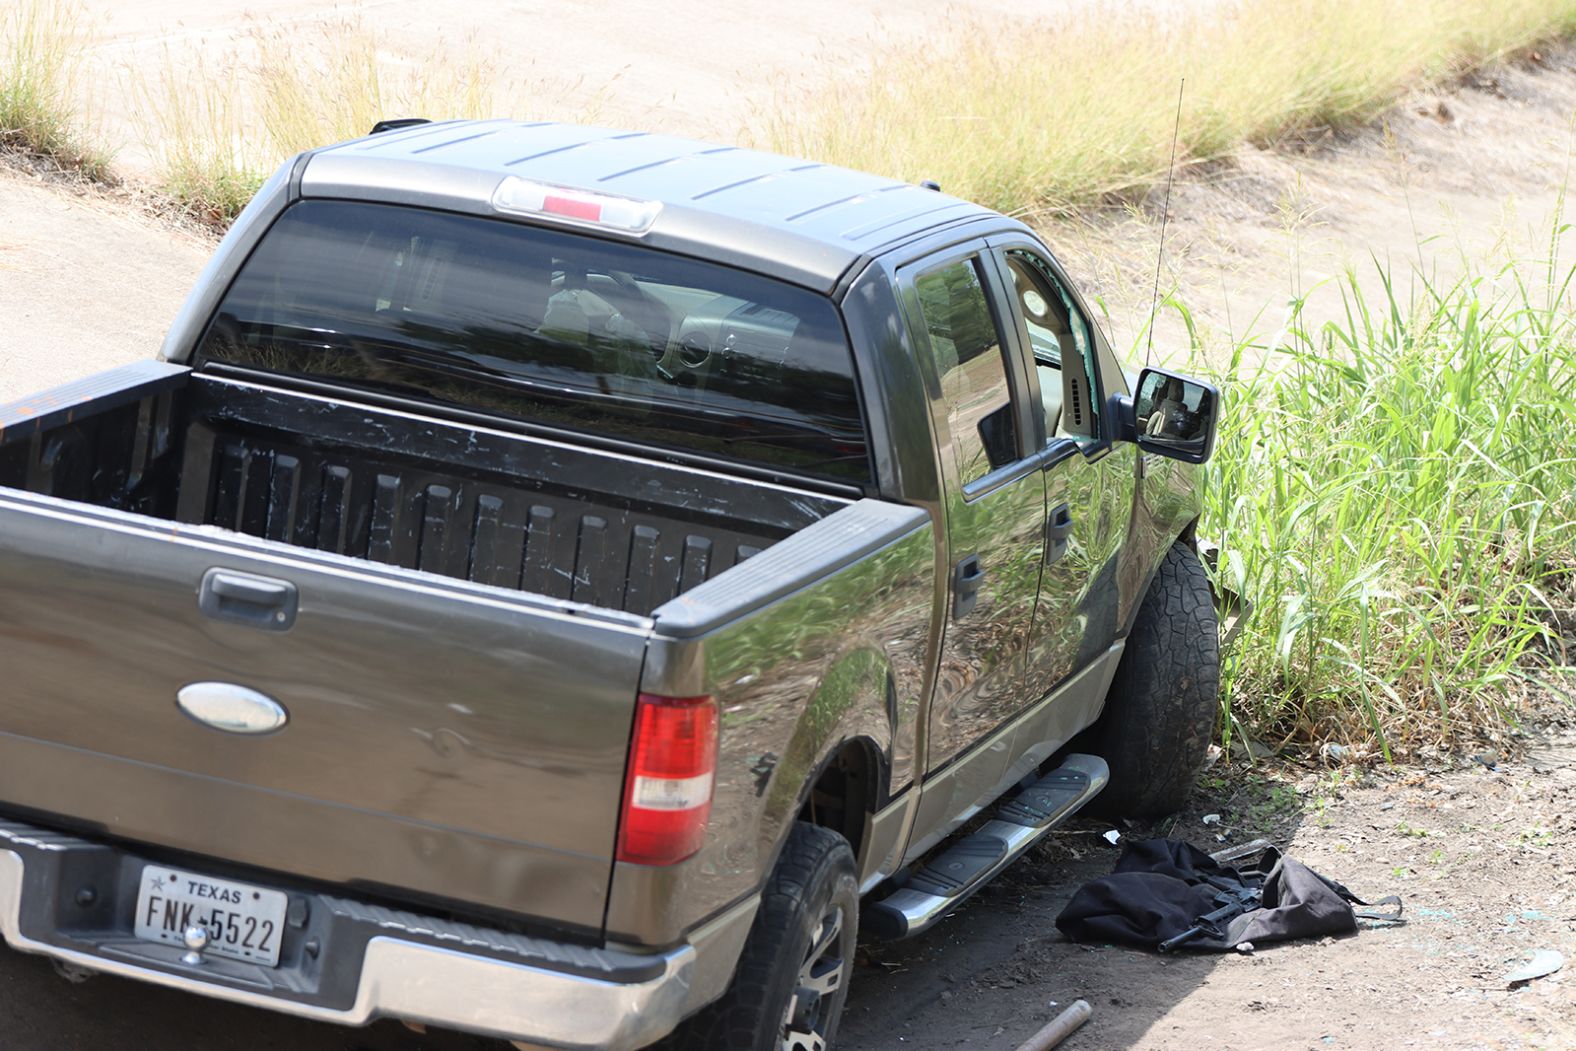 The shooter, 18-year-old Salvador Ramos, crashed his truck in a ditch near the school, DPS Regional Director Victor Escalon said during a news conference. Ramos got out of the truck carrying a rifle and bag, Escalon added.